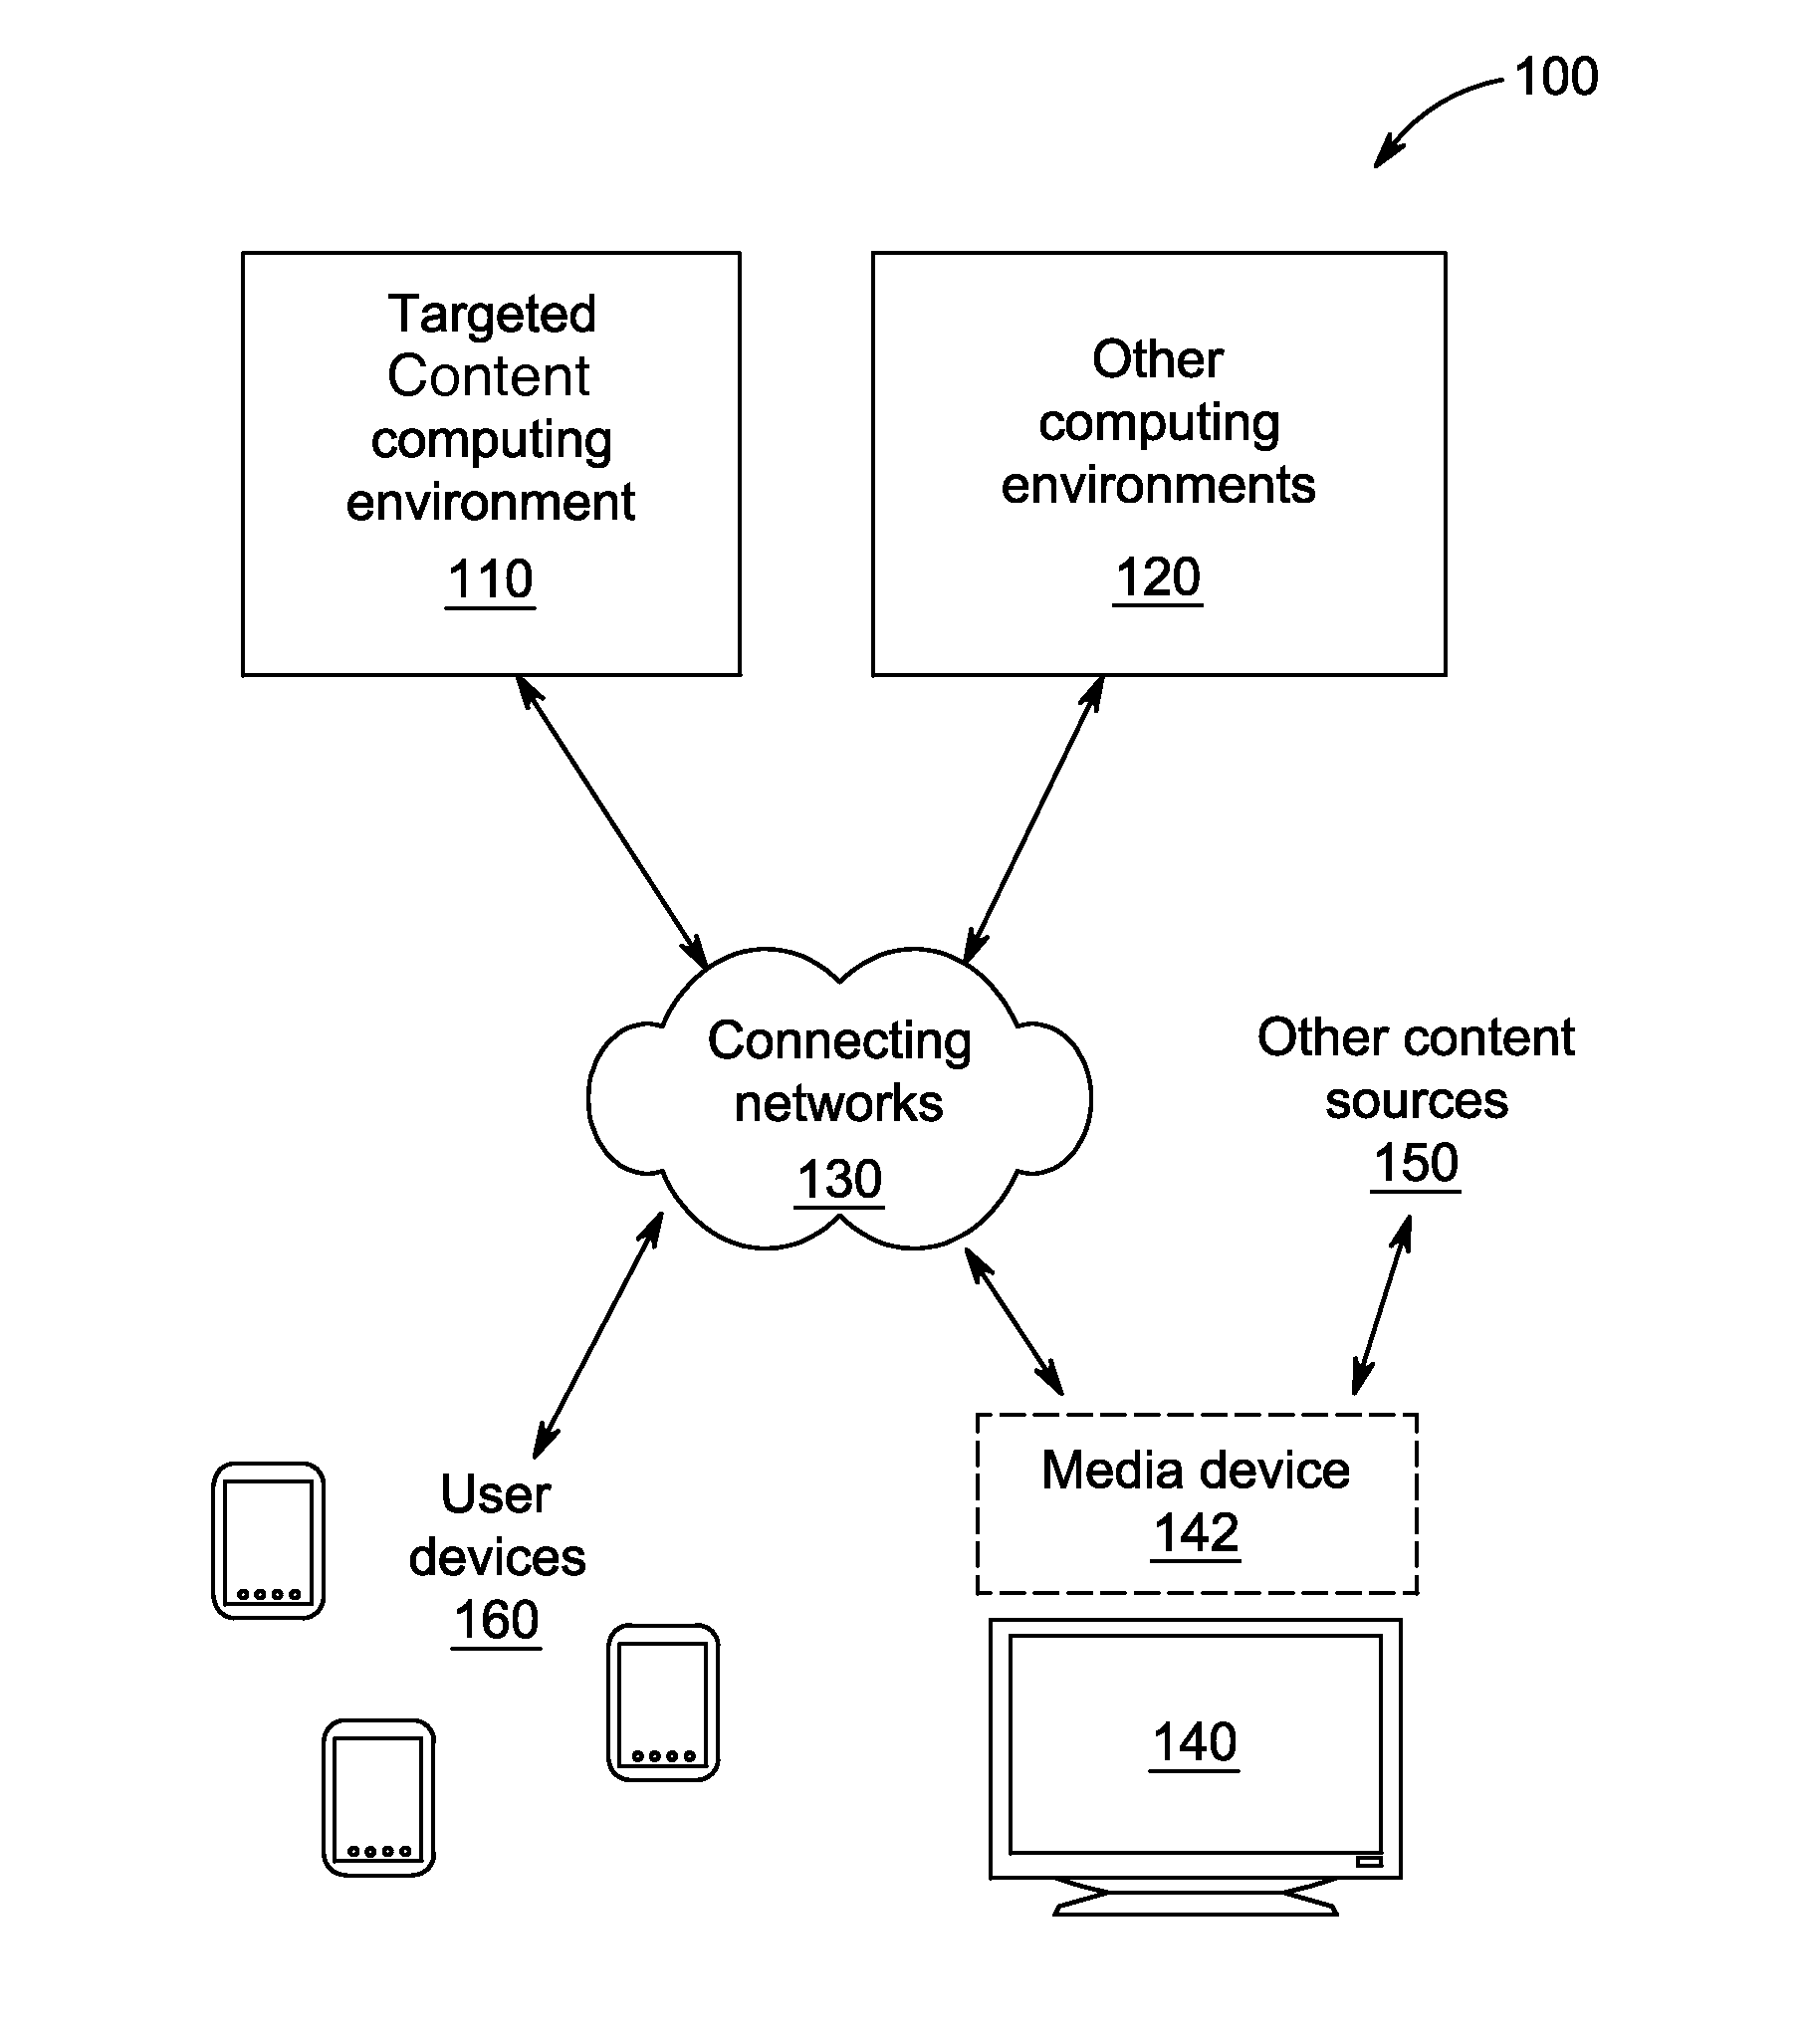 Providing targeted content based on a users moral values  - US-2016253710-A1